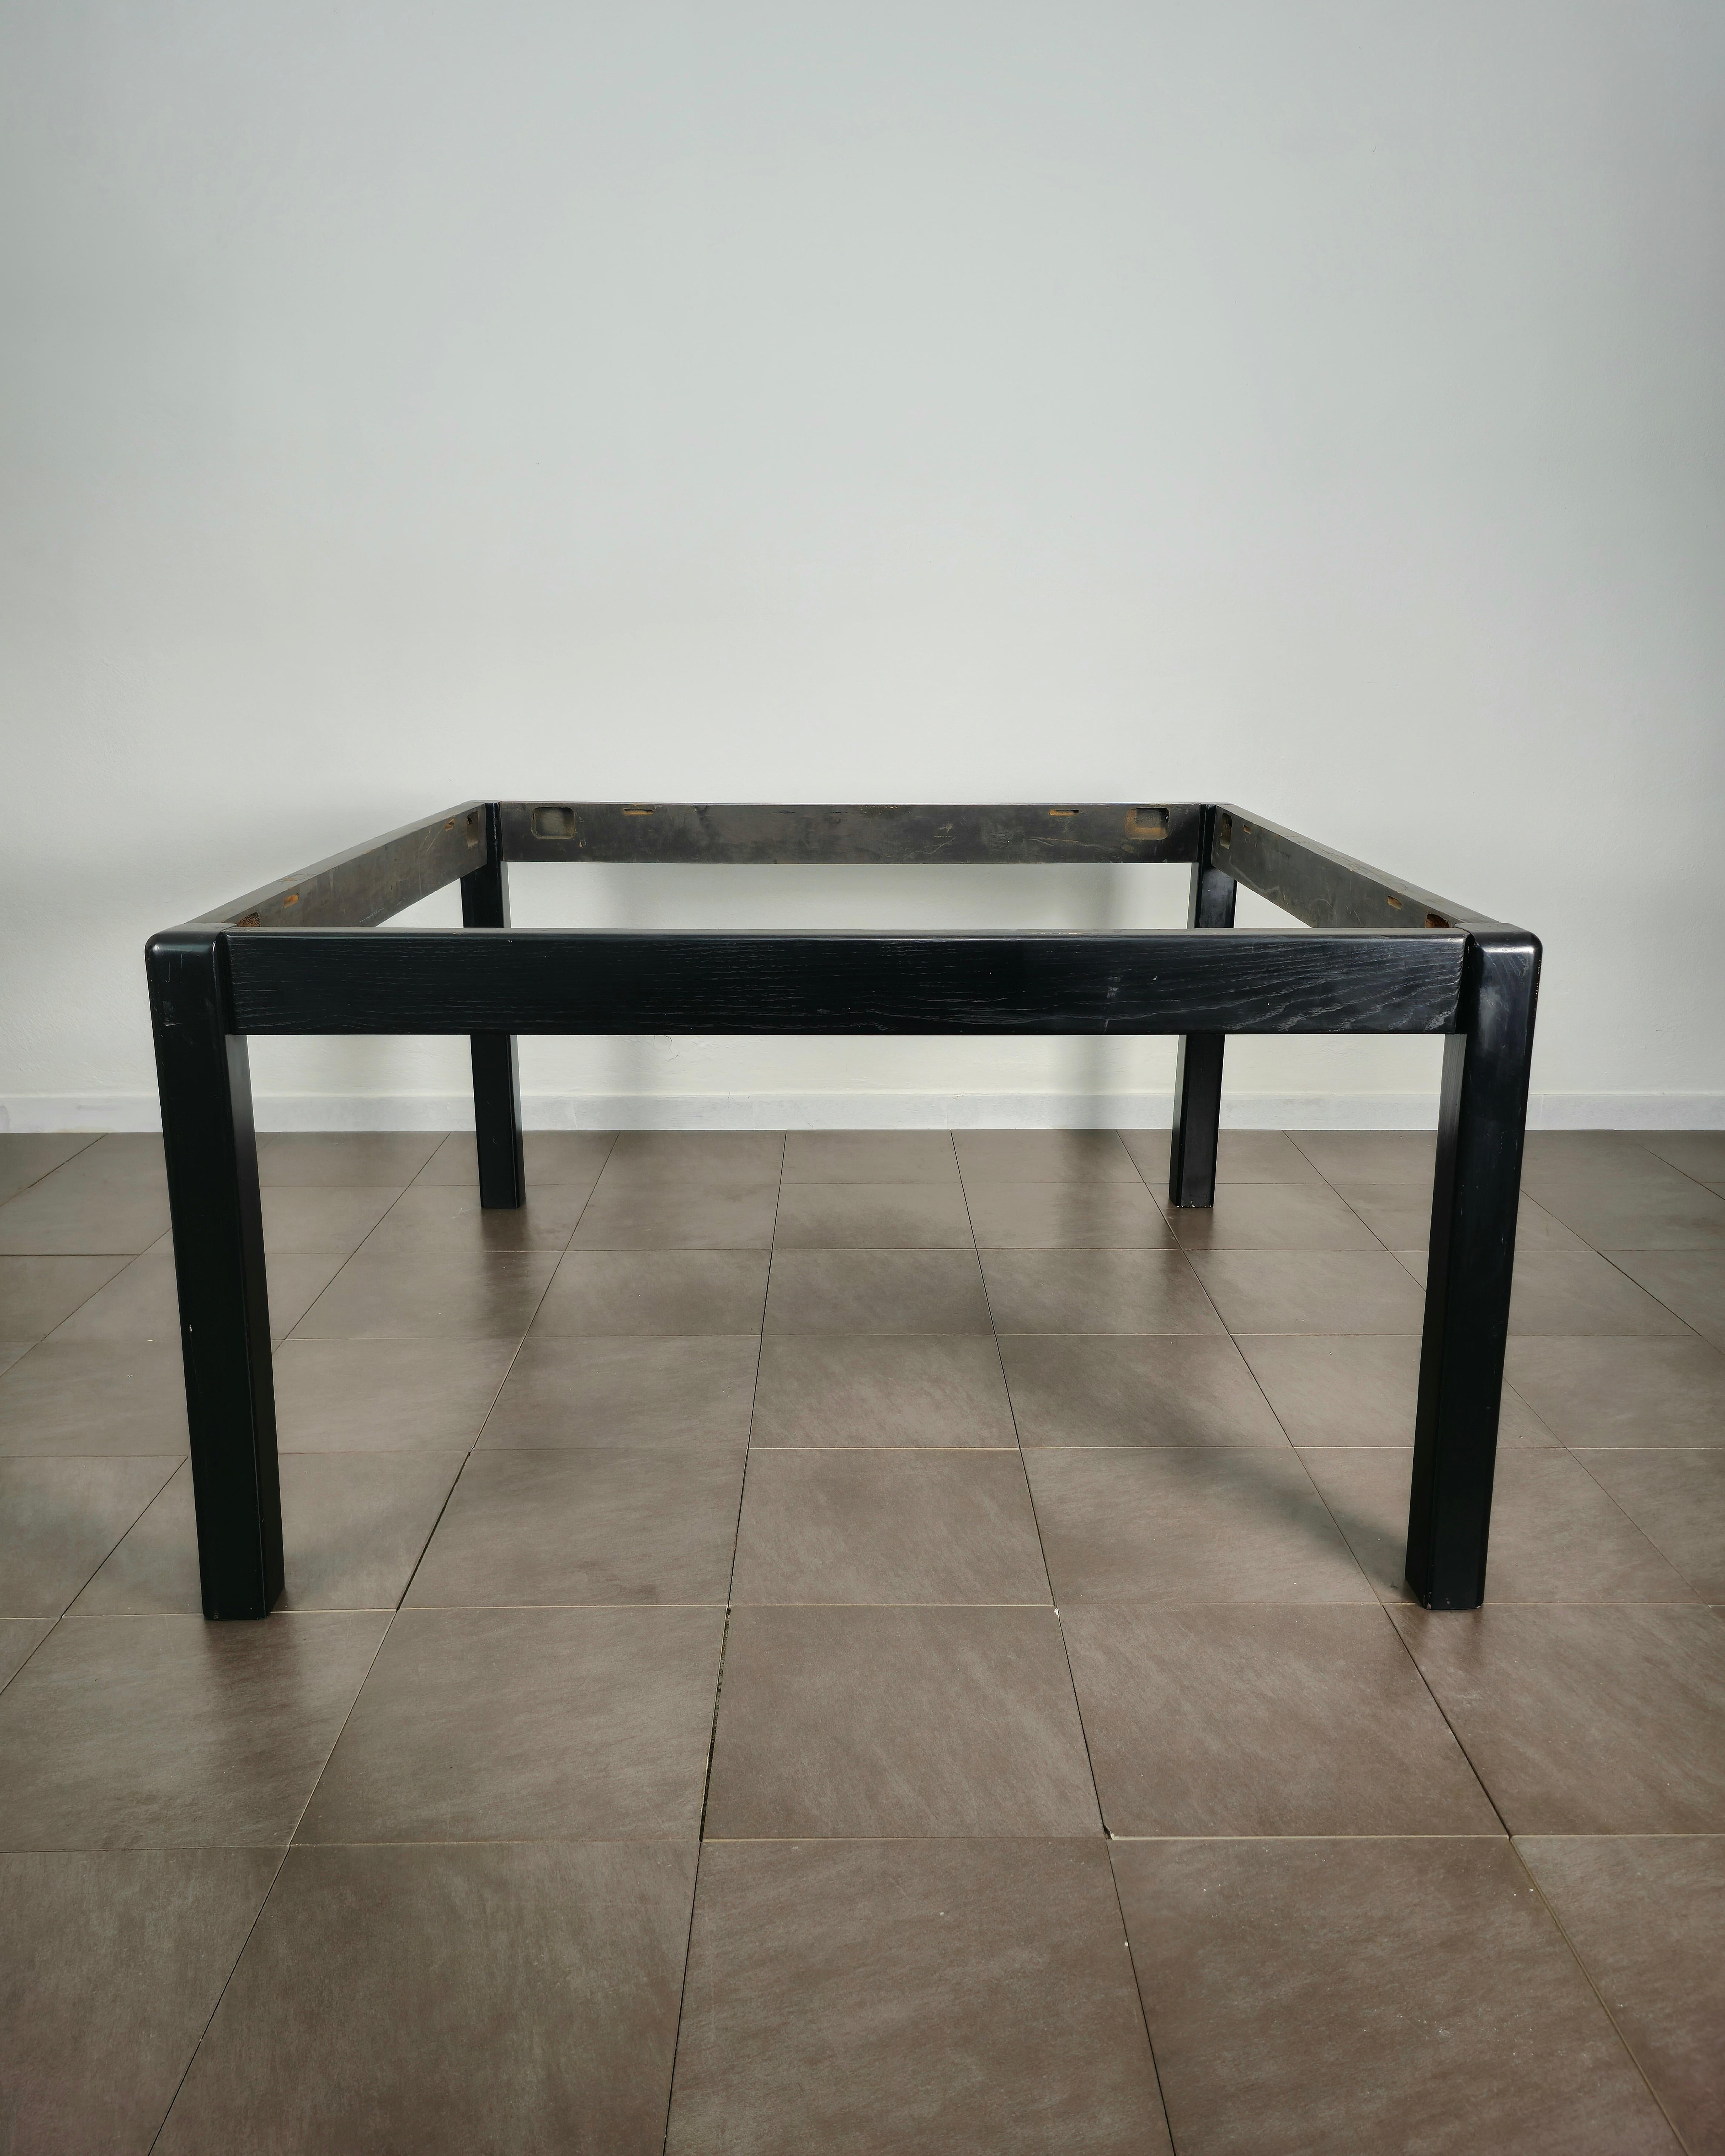 Dining Room Table Wood Enamelled Black Anodized Aluminum Midcentury, Italy 1970s For Sale 3